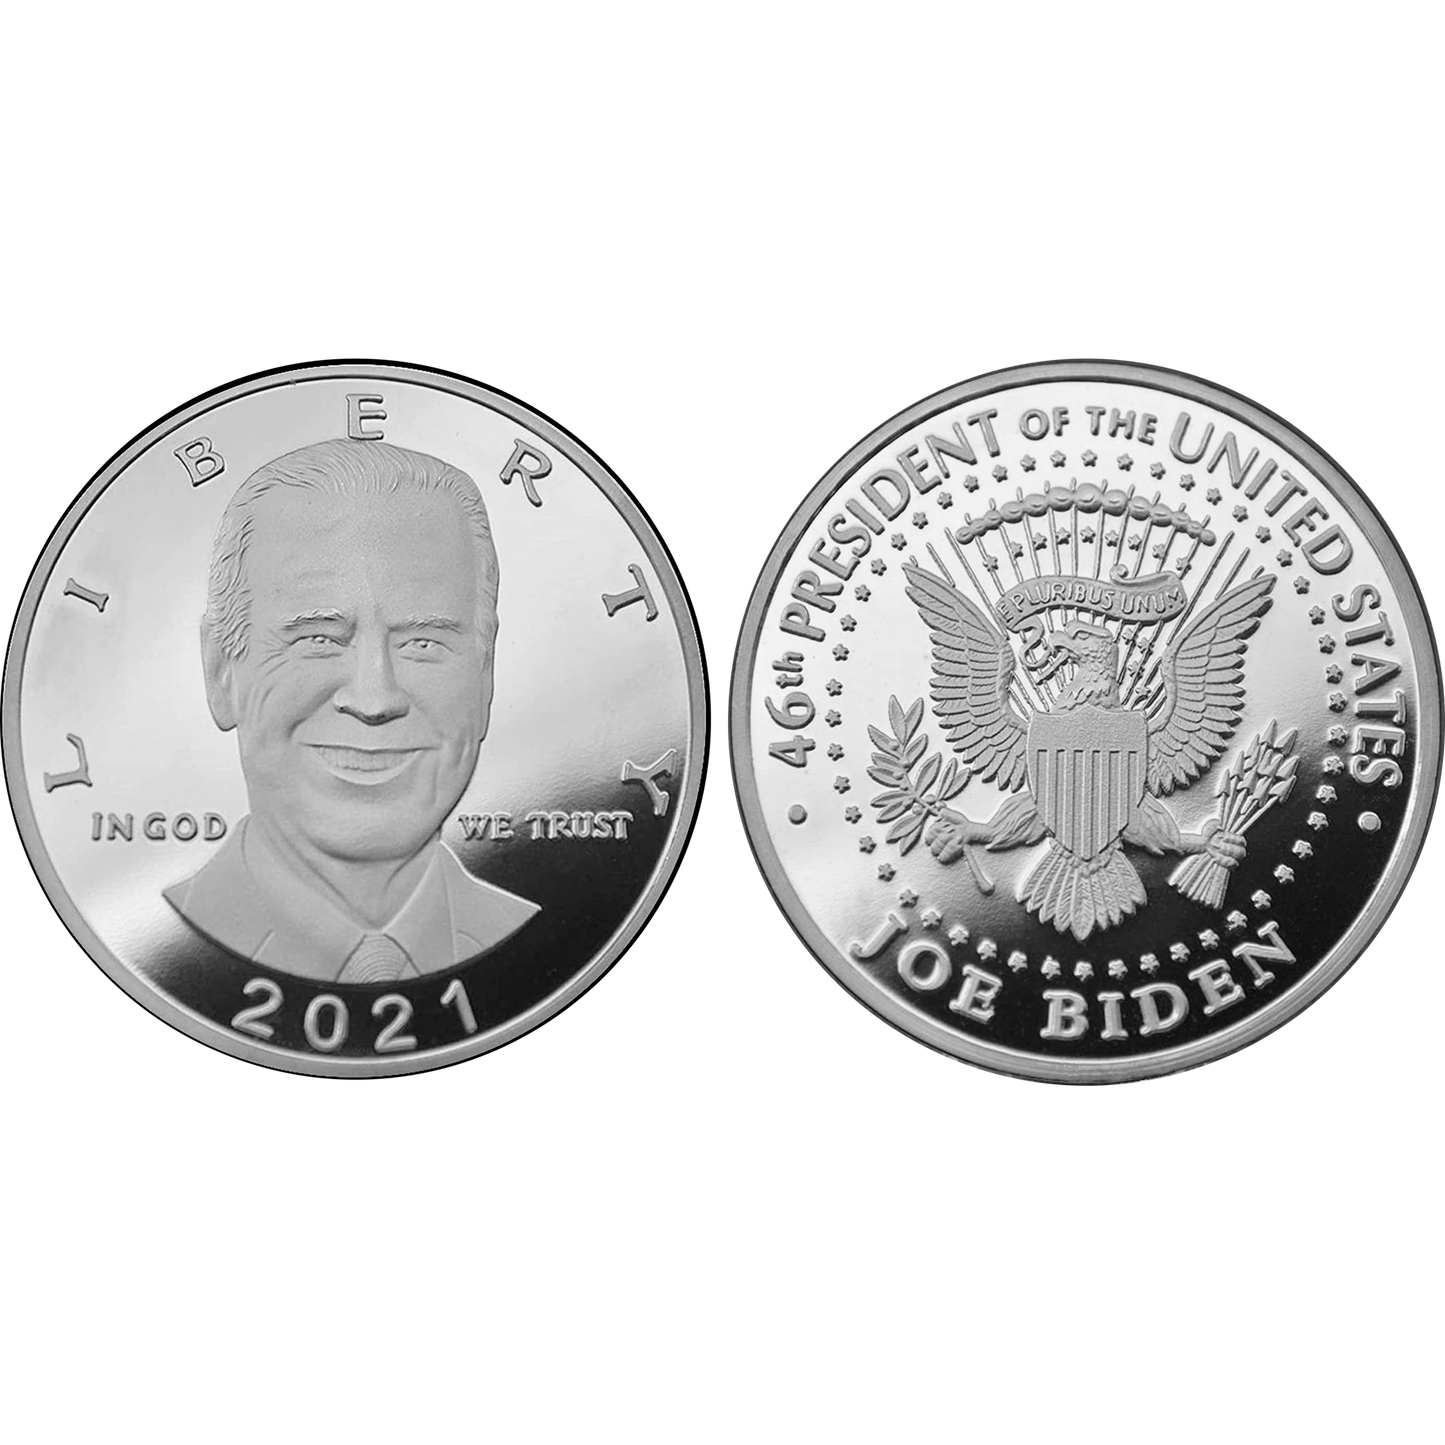 BL13-005 President Joe Biden Sterling Silver plated 2021 LIBERTY Challenge Coin 46th President of The United States